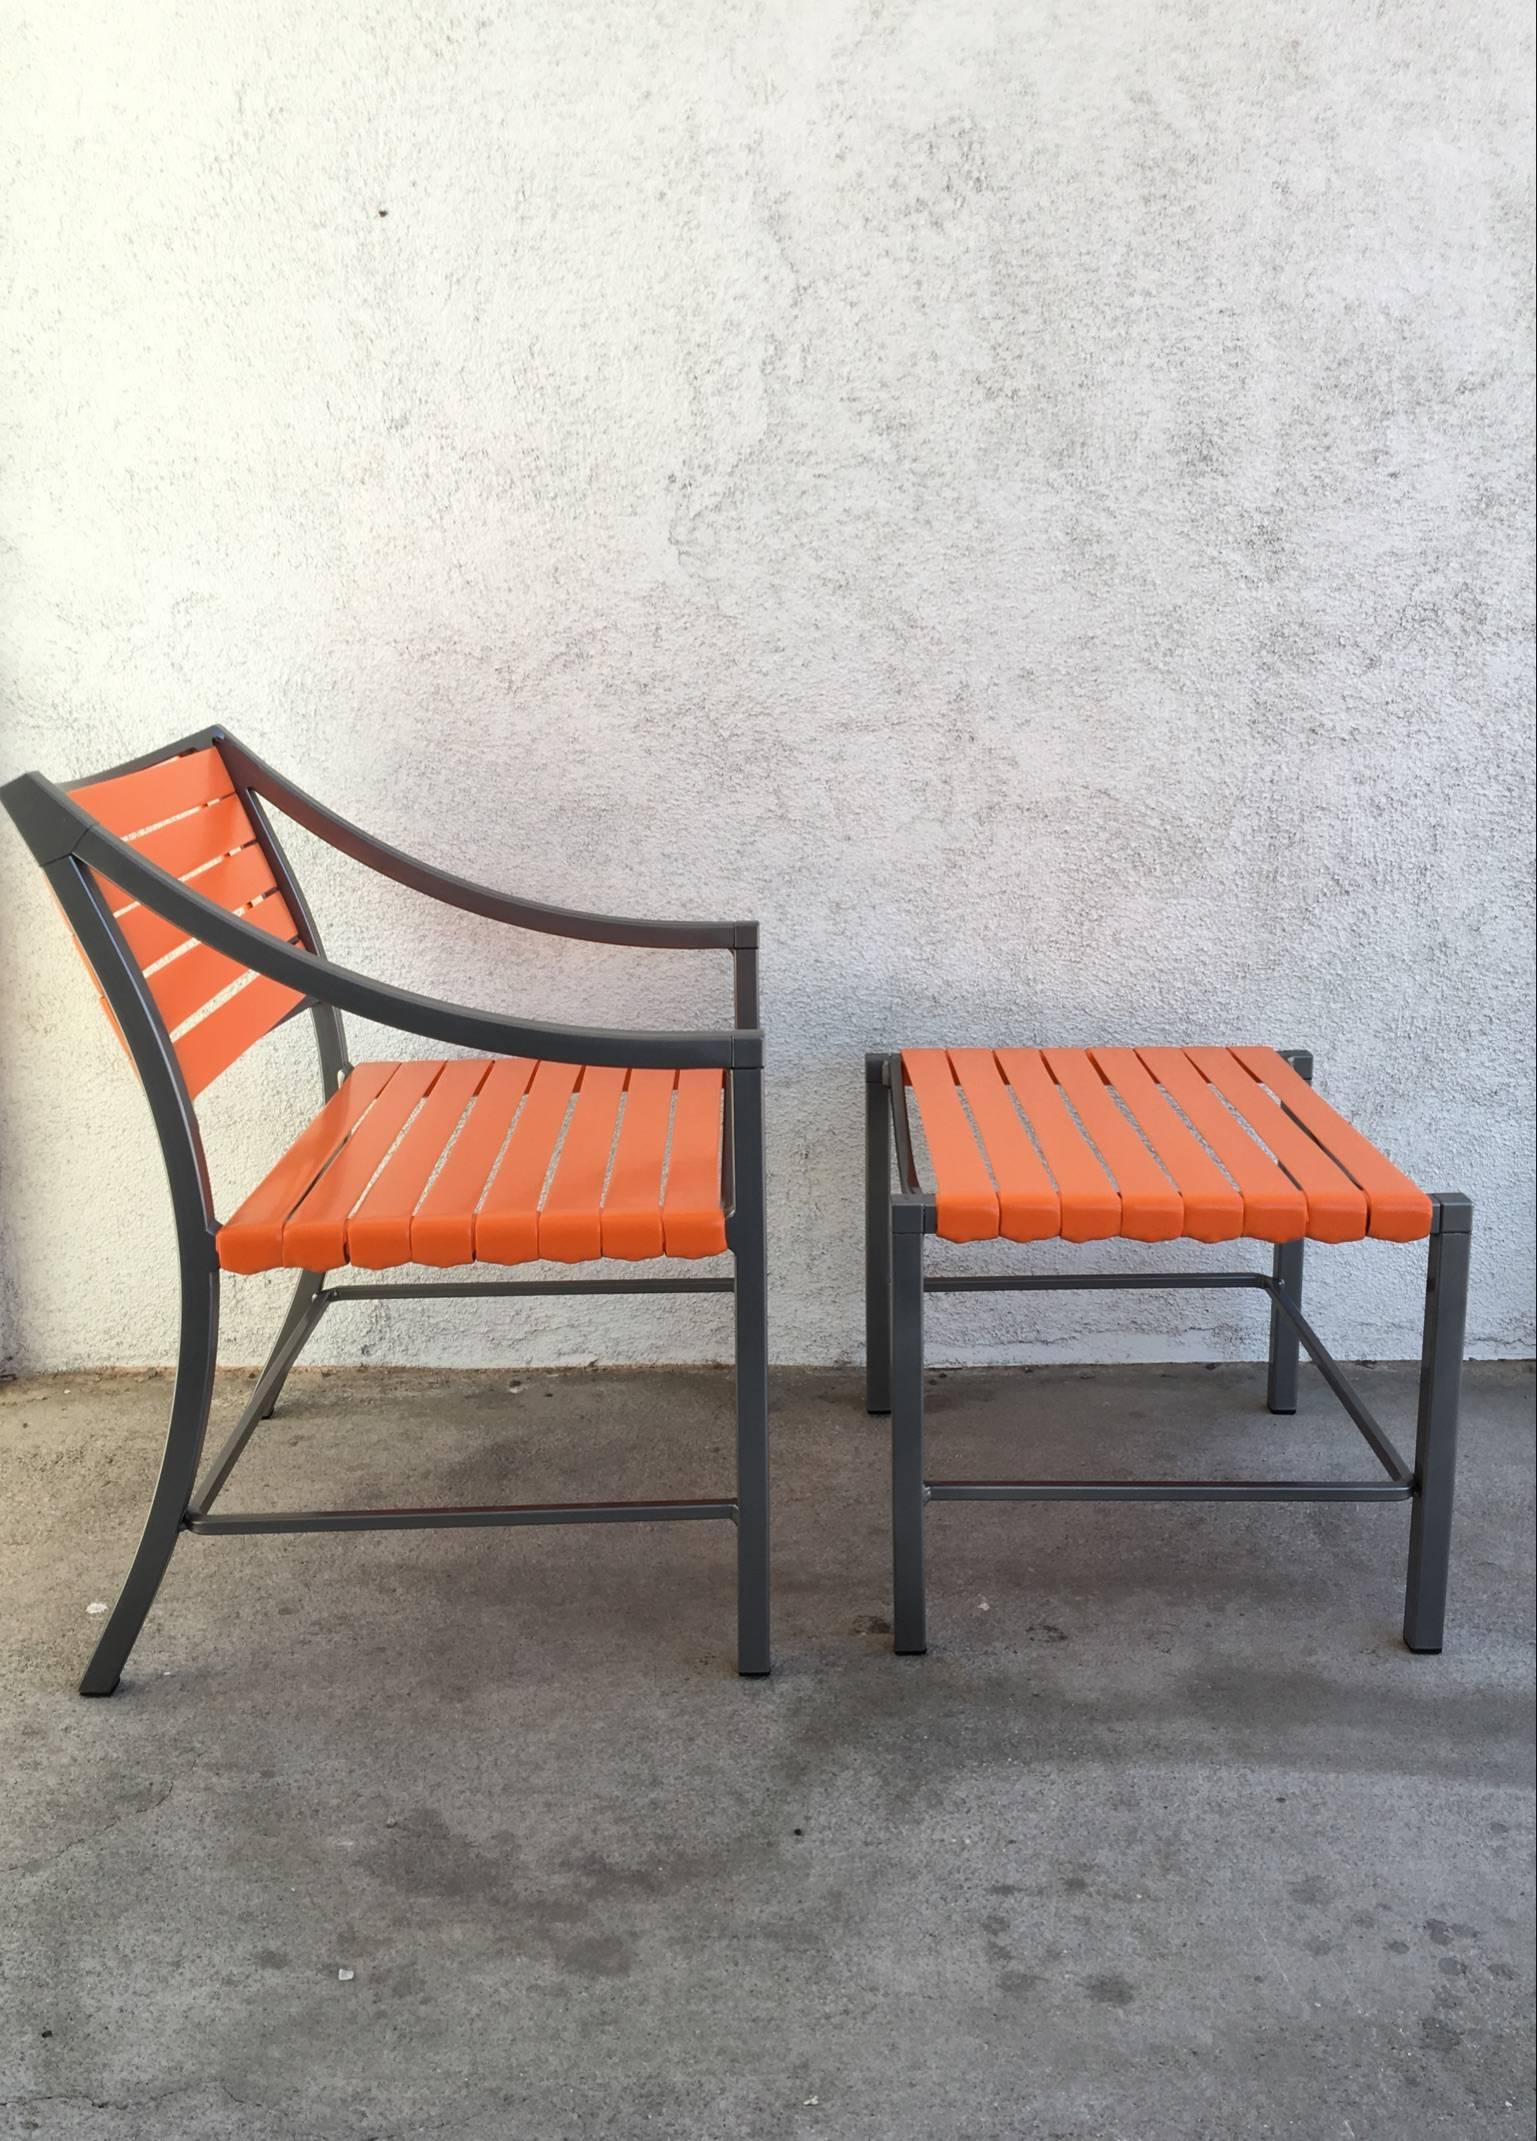 American Pair of Outdoor Chairs and Ottomans by Brown Jordan